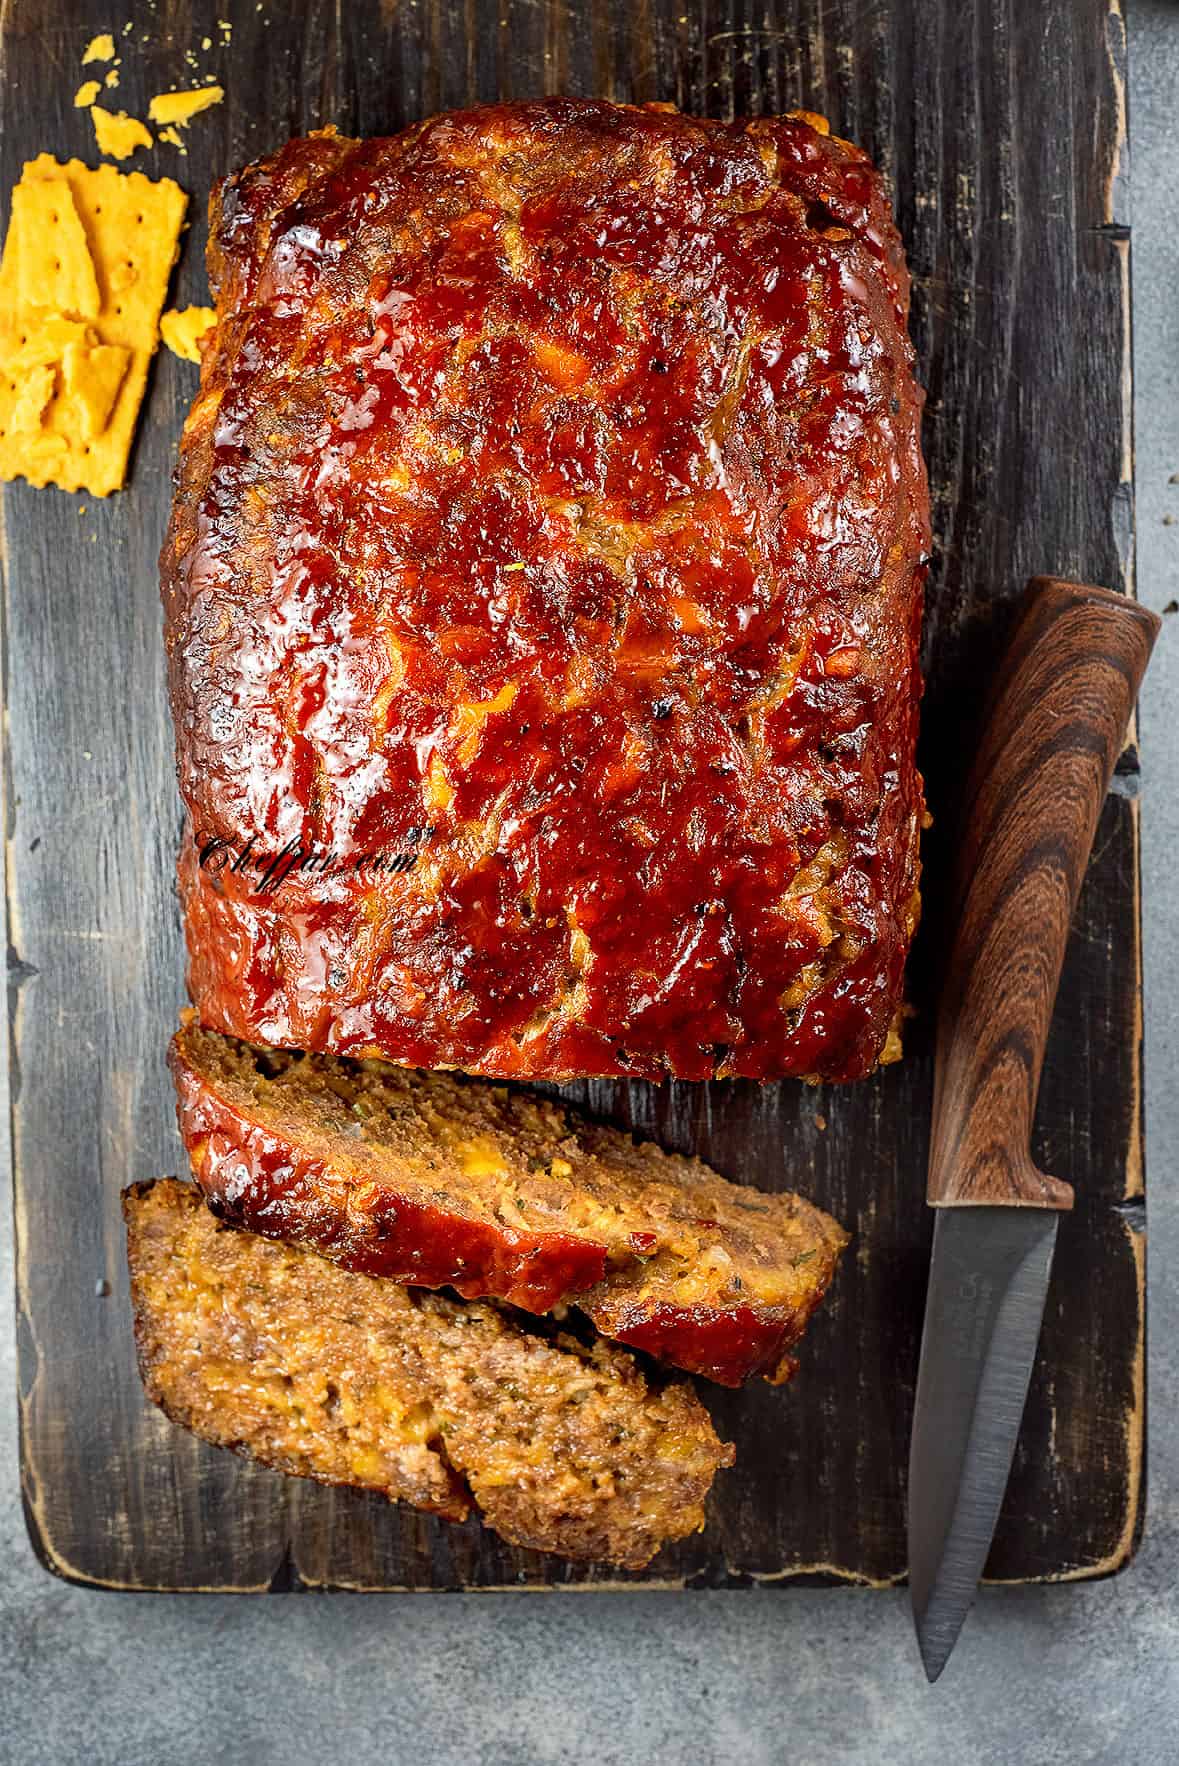 
easy  meatloaf recipe with few ingredients